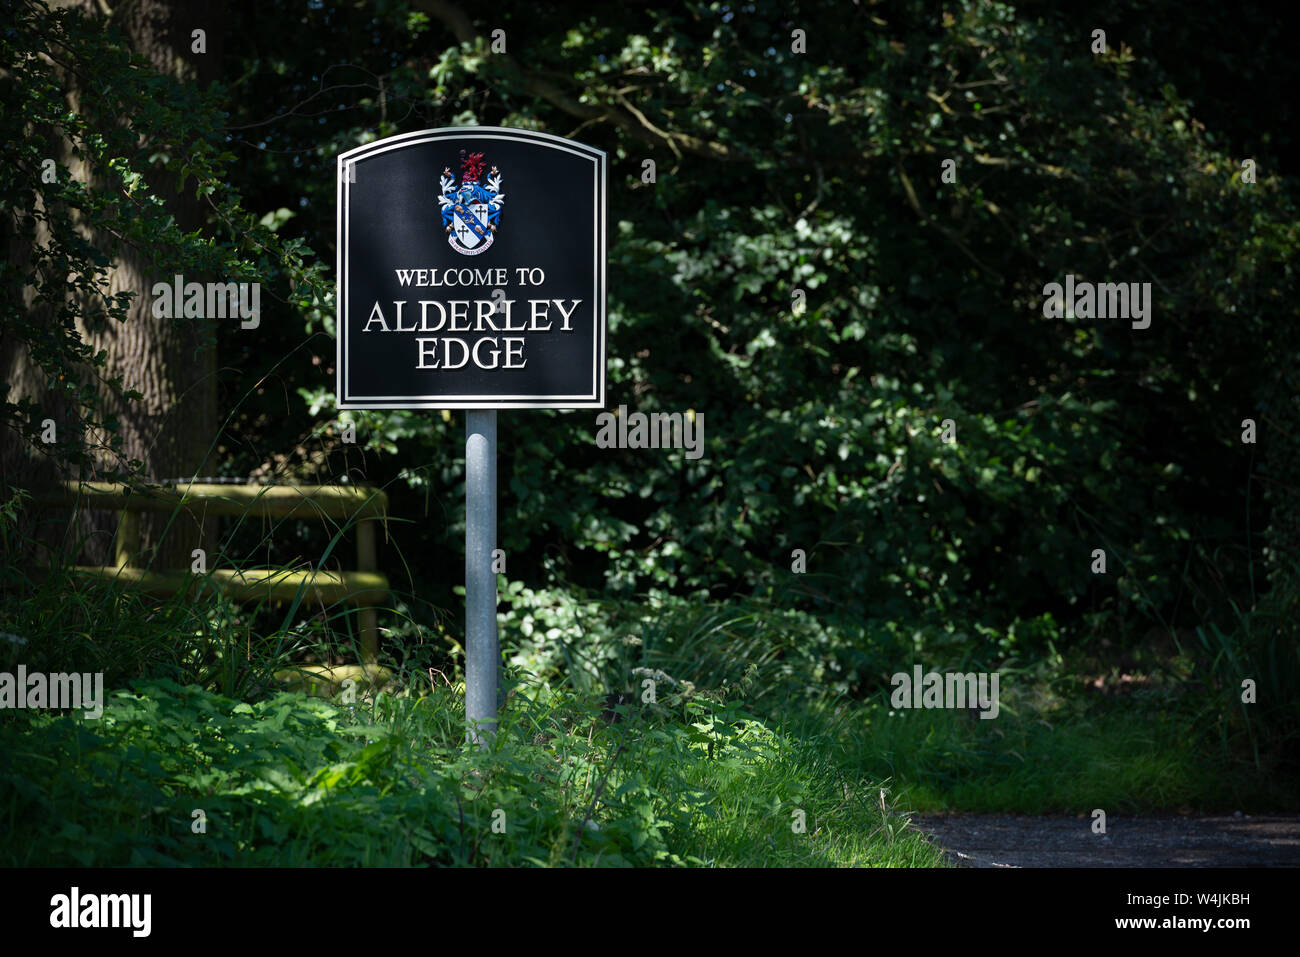 A sign welcomes people to the small town of Alderley Edge in Cheshire, UK. Stock Photo